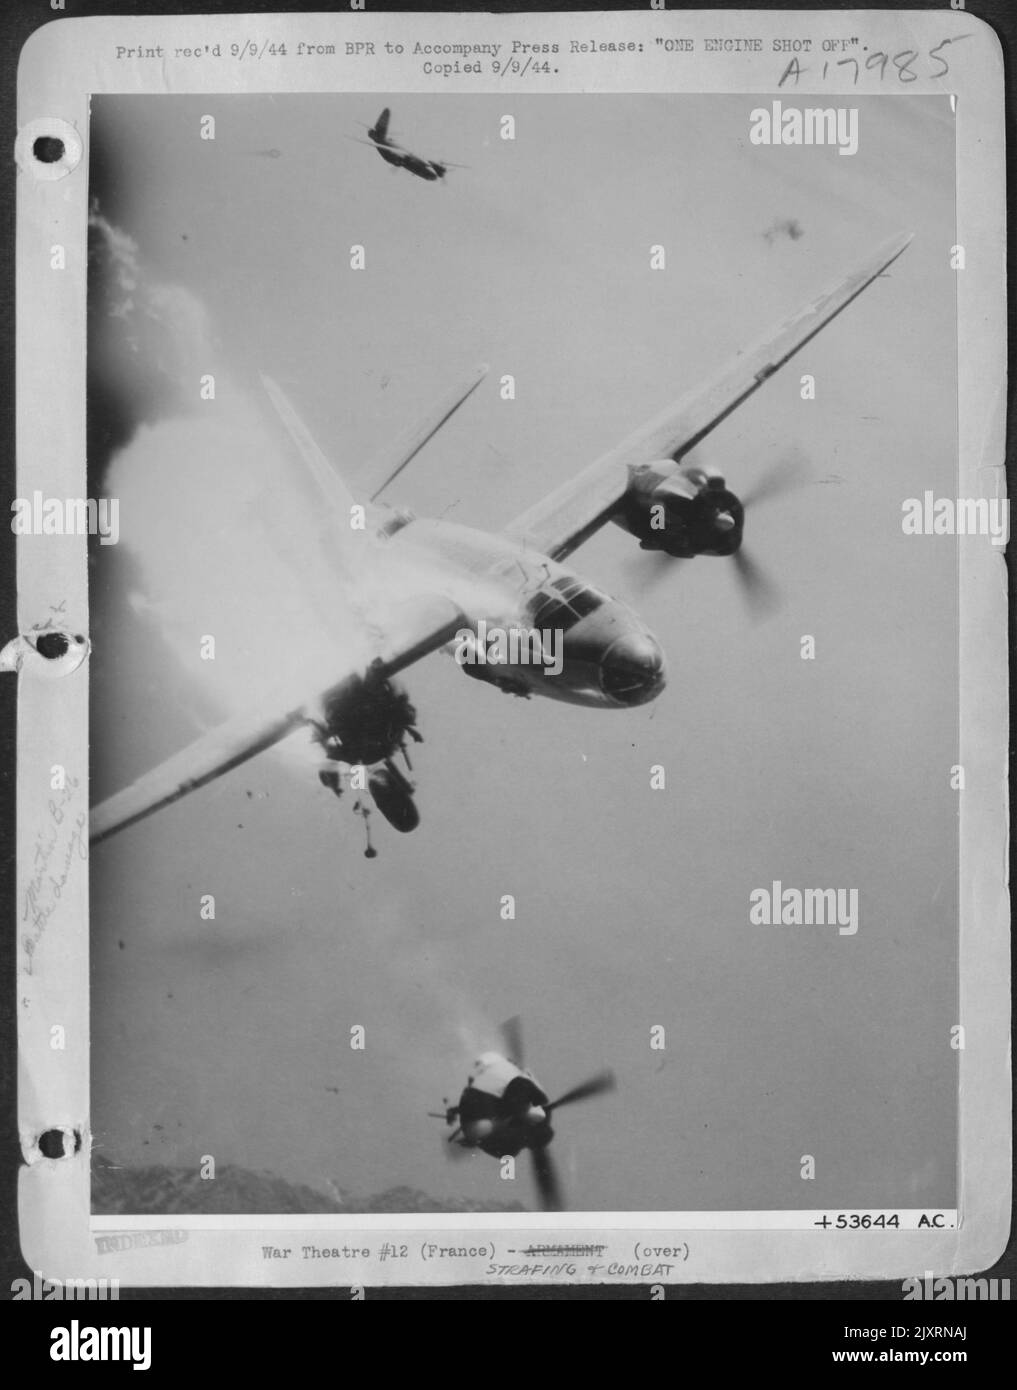 This Martin B-26 Marauder of the 12th U.S. Army Air Force has just received a direct hit by an 88 mm flak shell during an attack on enemy coastal defense guns in Toulon Harbor, southern France. With the right engine sheared off but still turning and Stock Photo